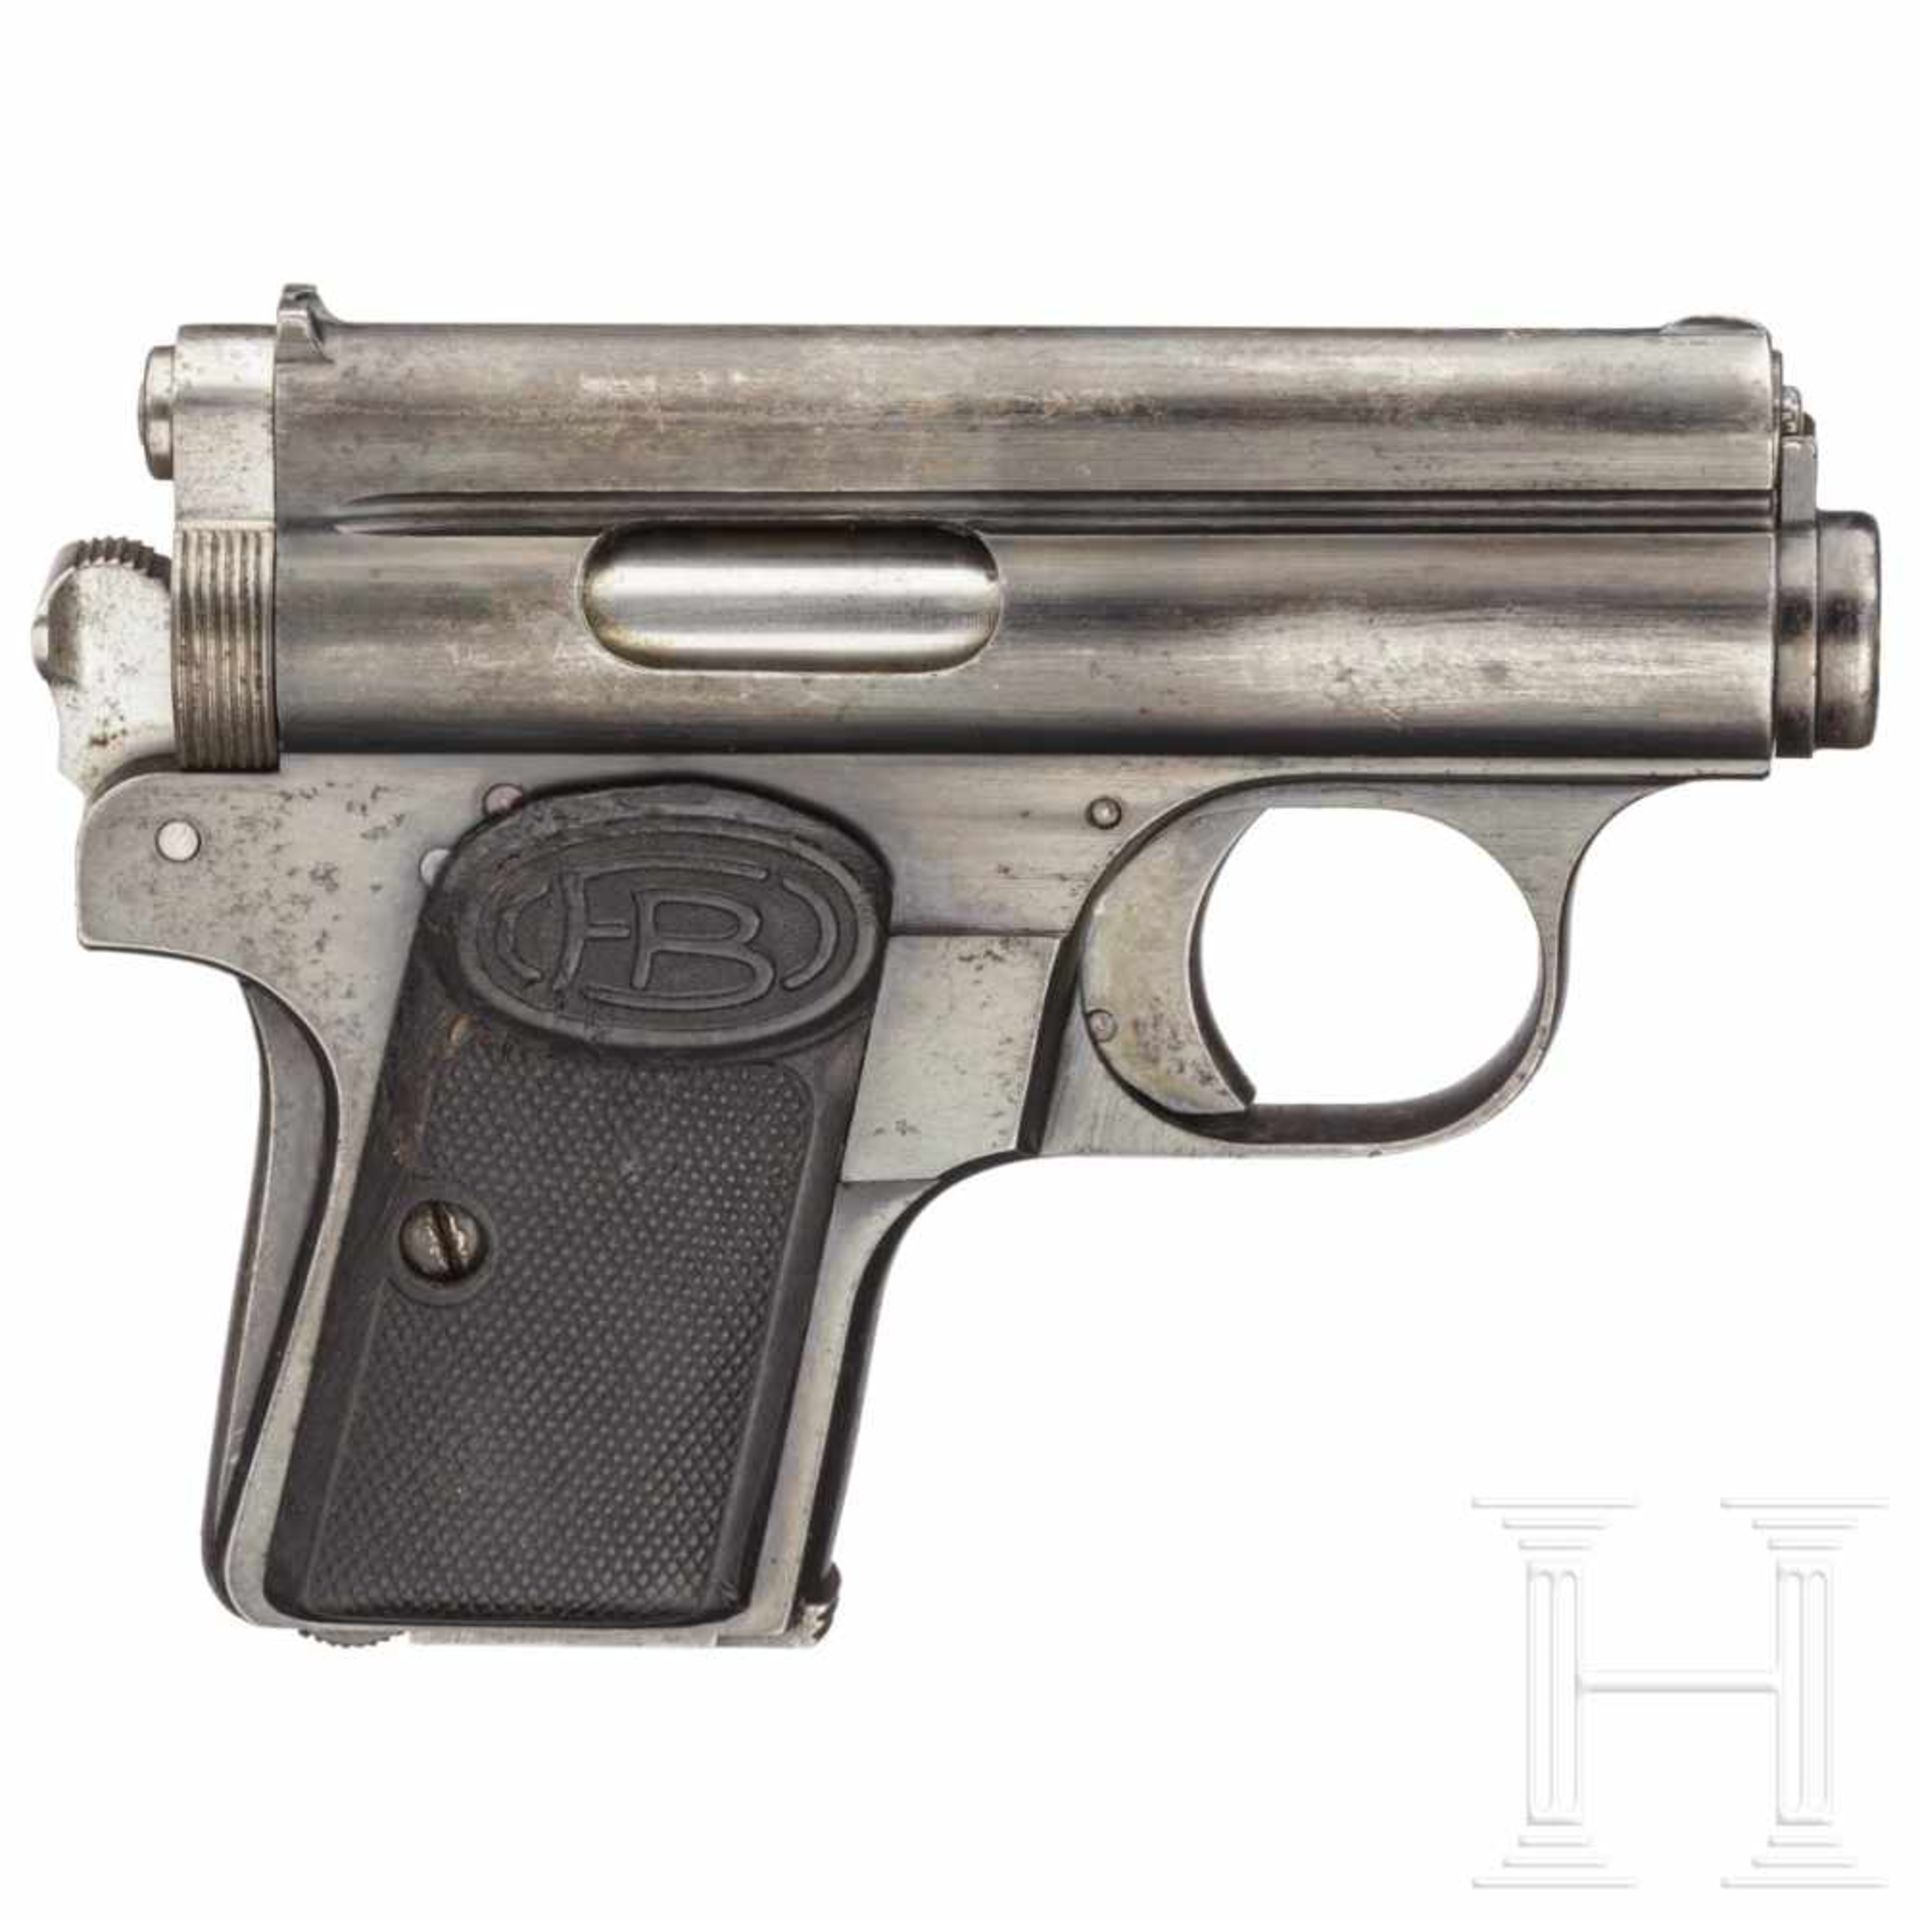 A Frommer M Baby cal. 9mm with holsterKal. 9 mm Brown. kurz, Nr. 24294, Blanker Lauf. - Bild 2 aus 4